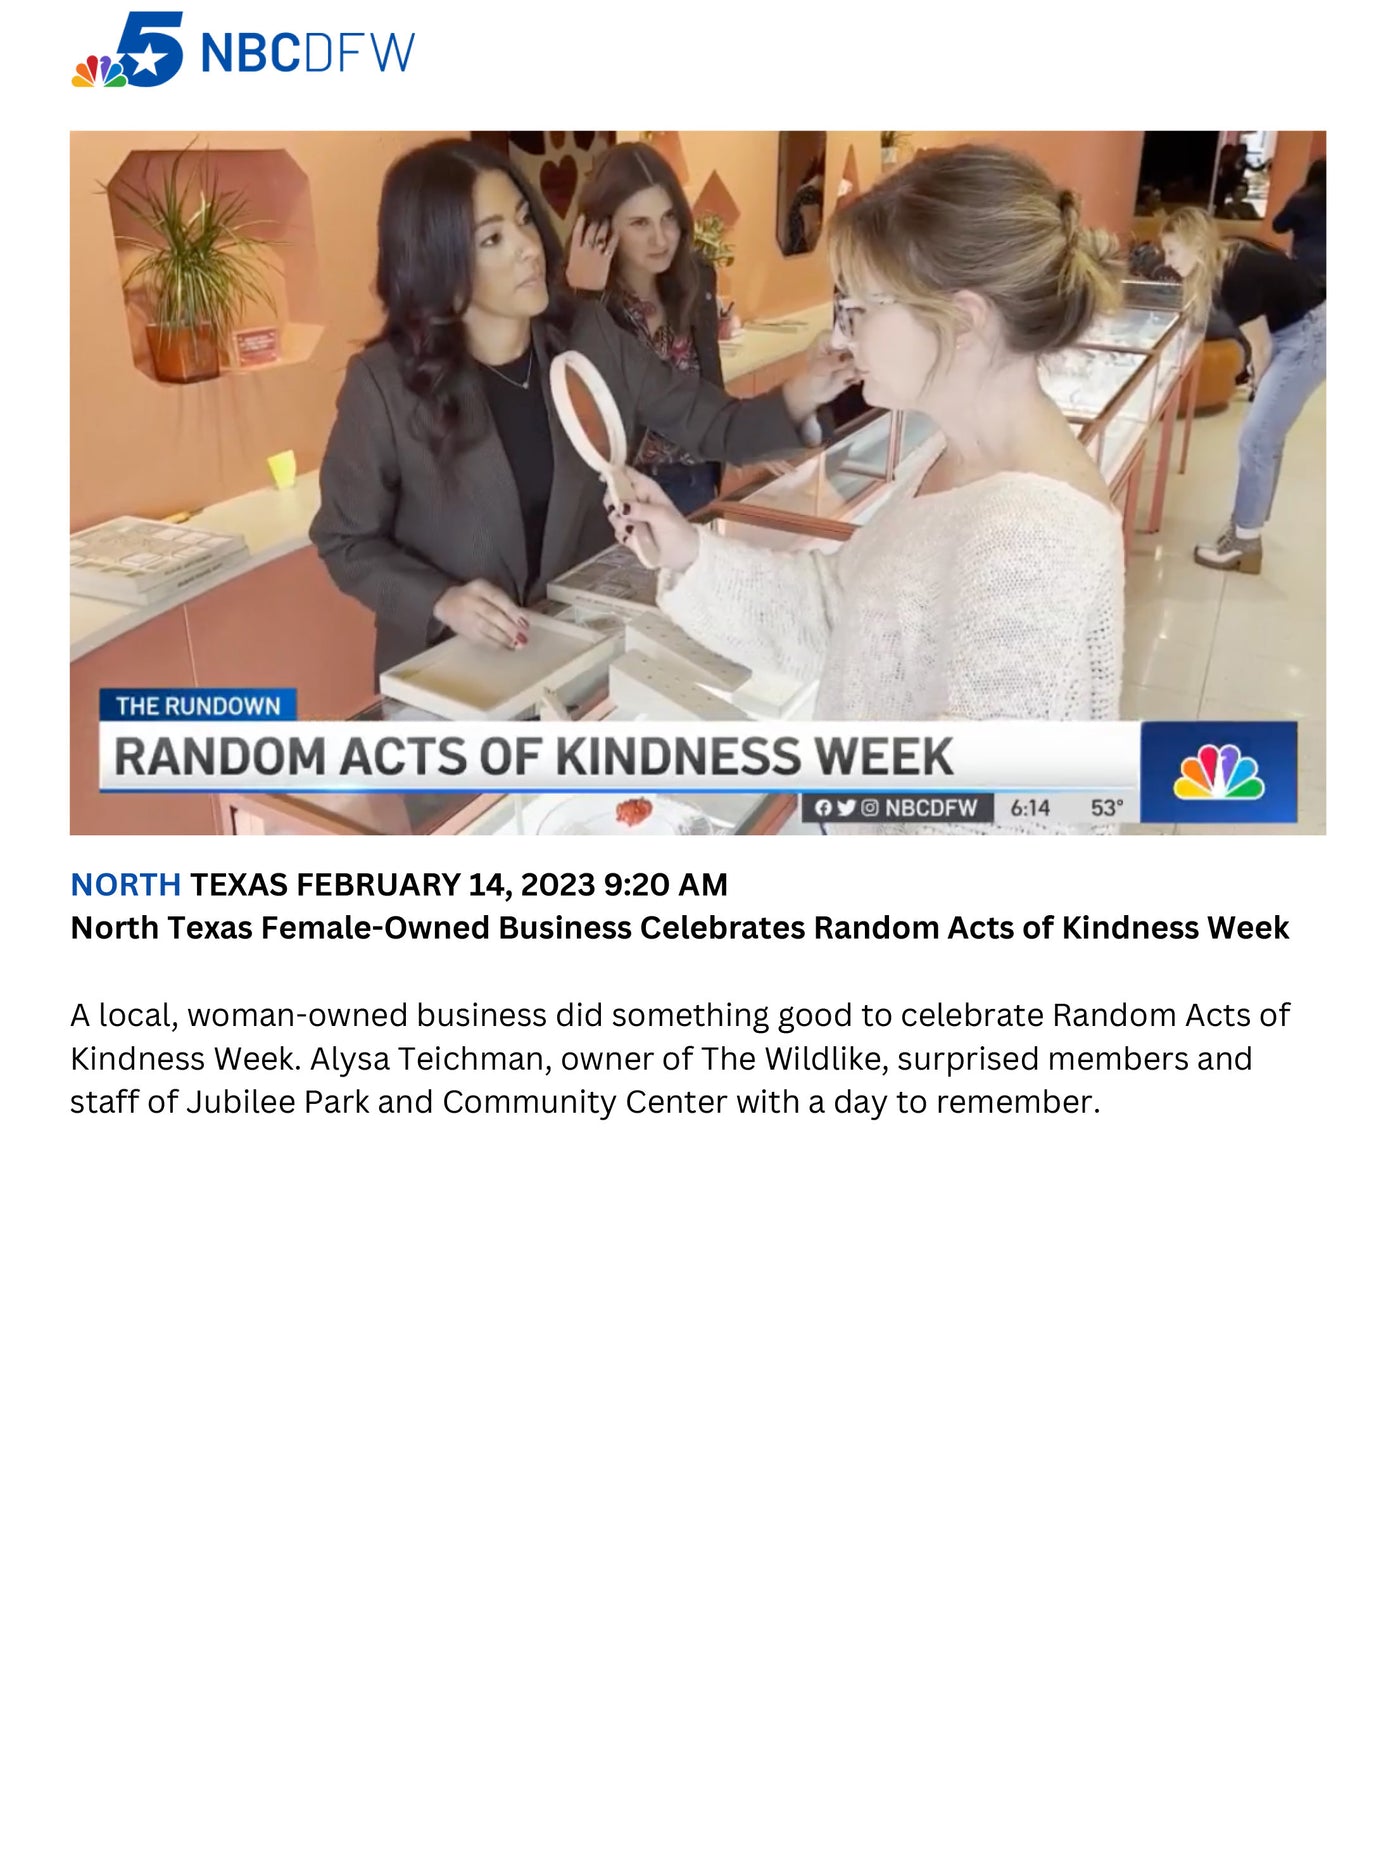 RANDOM ACTS OF KINDNESS WEEK